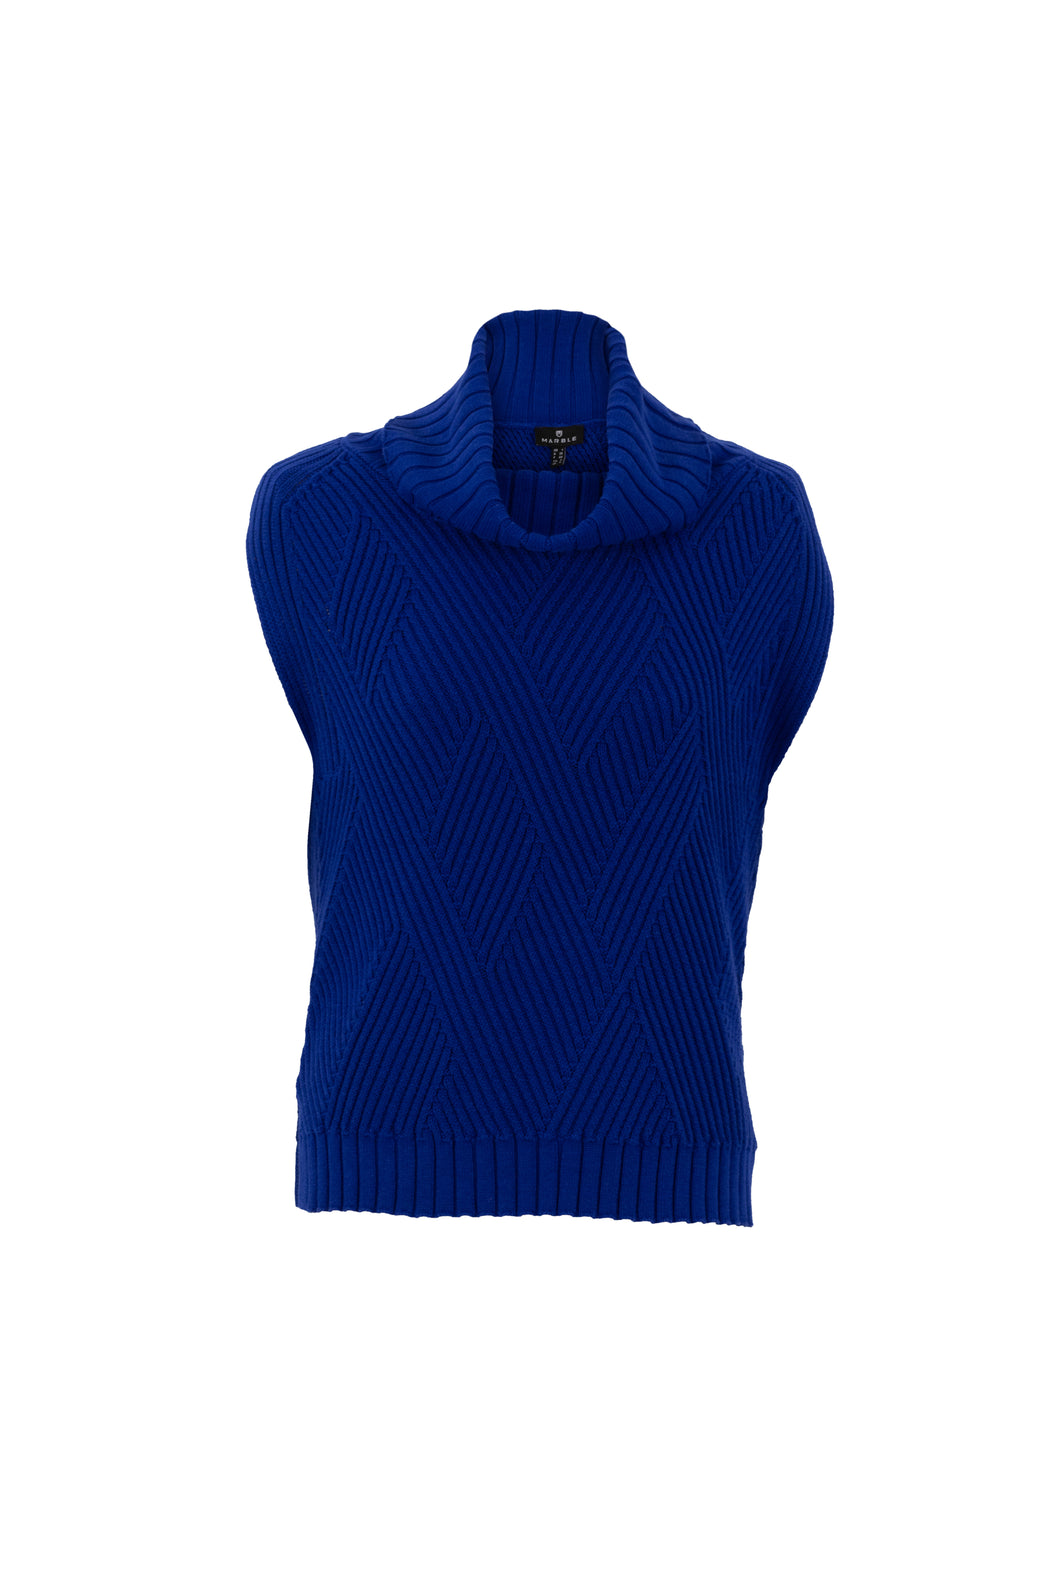 MARBLE FASHIONS 6755 SWEATER COLOUR 210 - ROYAL BLUE